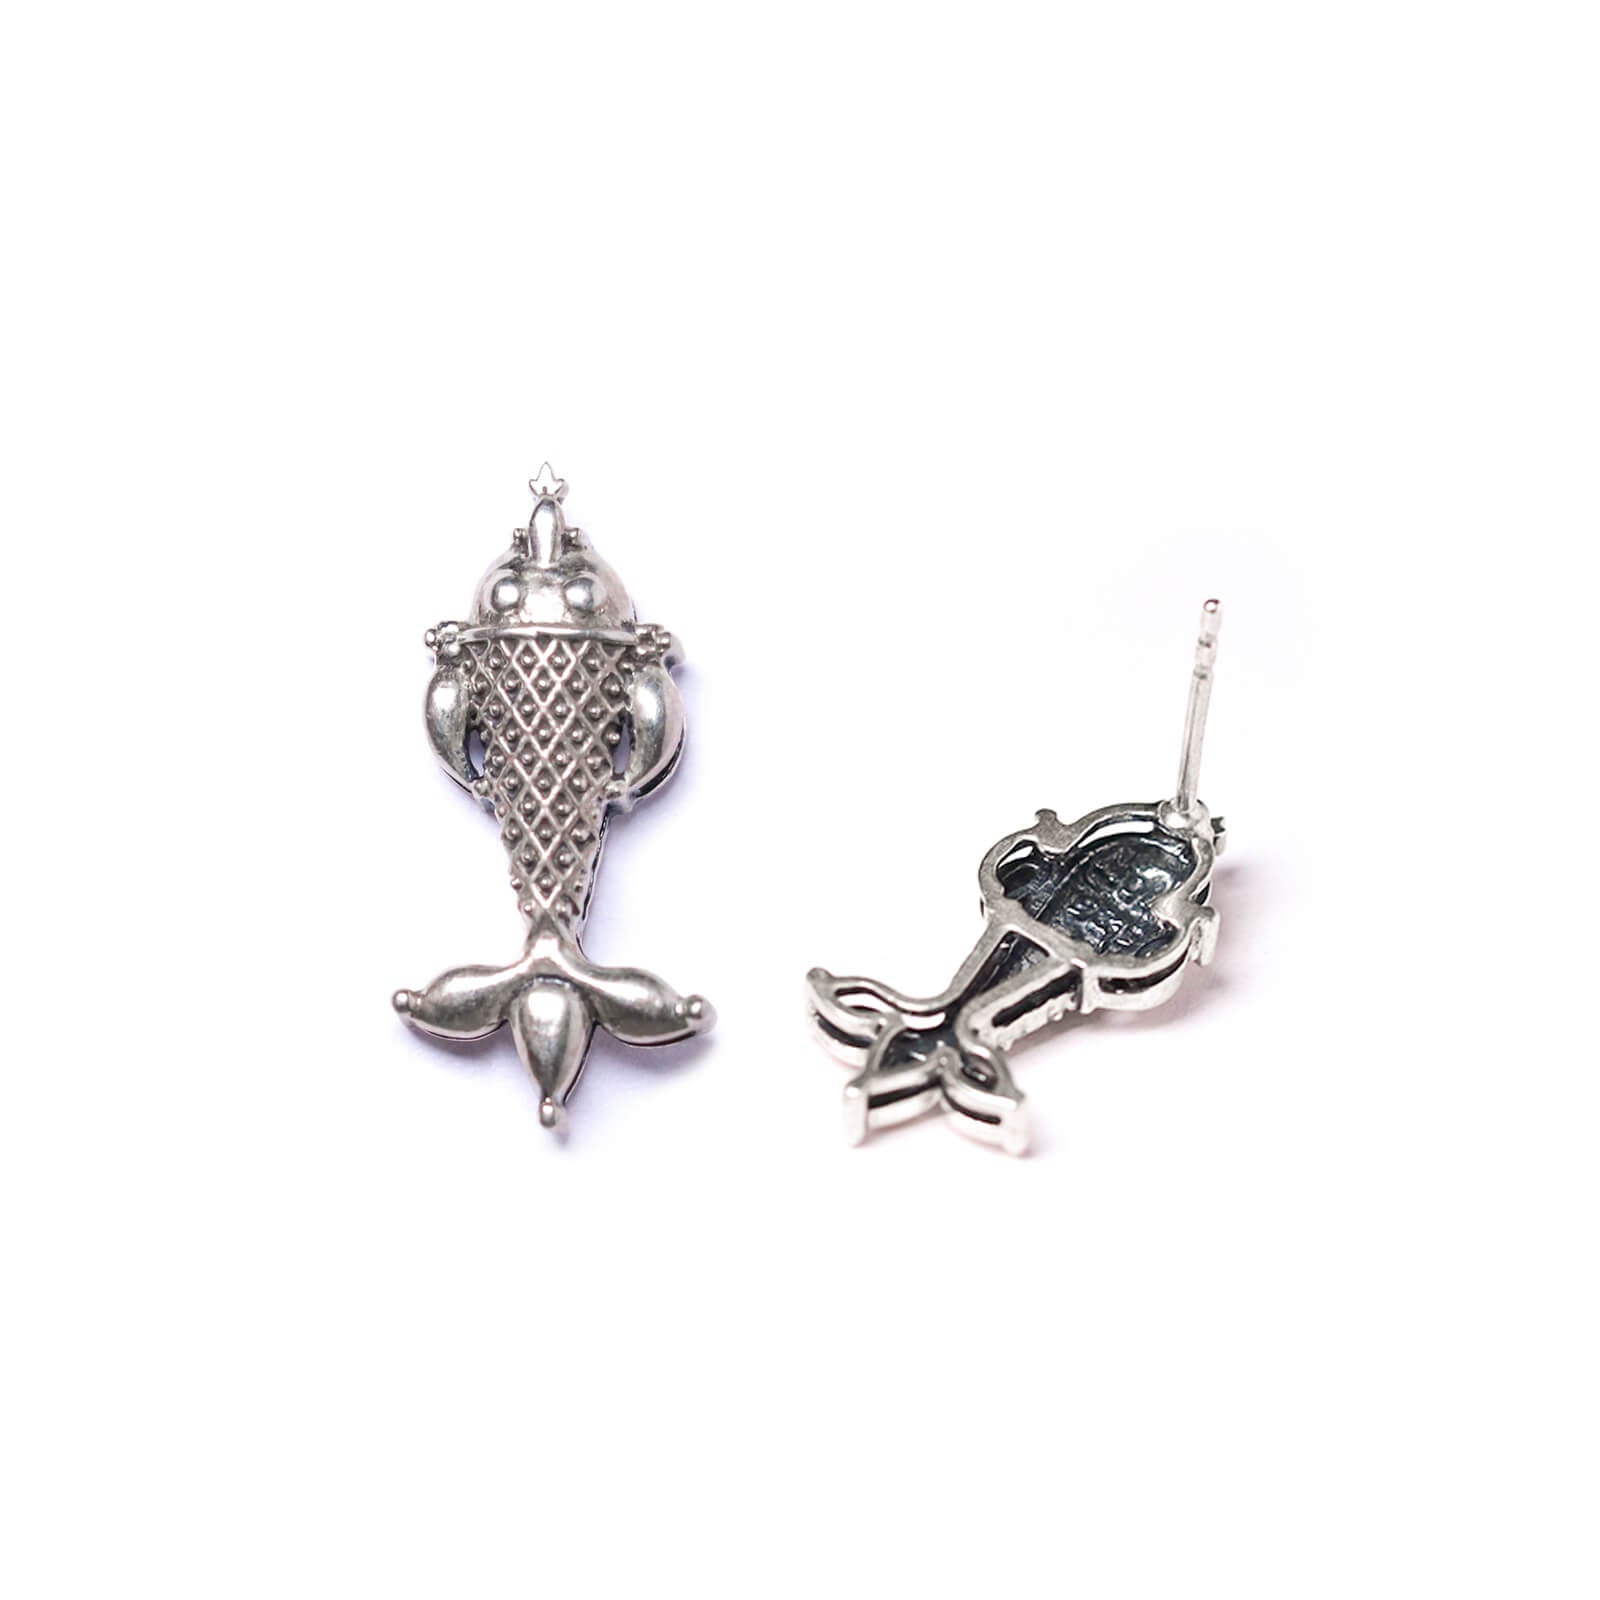 Cape Cod Dangling Fish Solid Sterling Silver Earrings | The Gilded Oyster